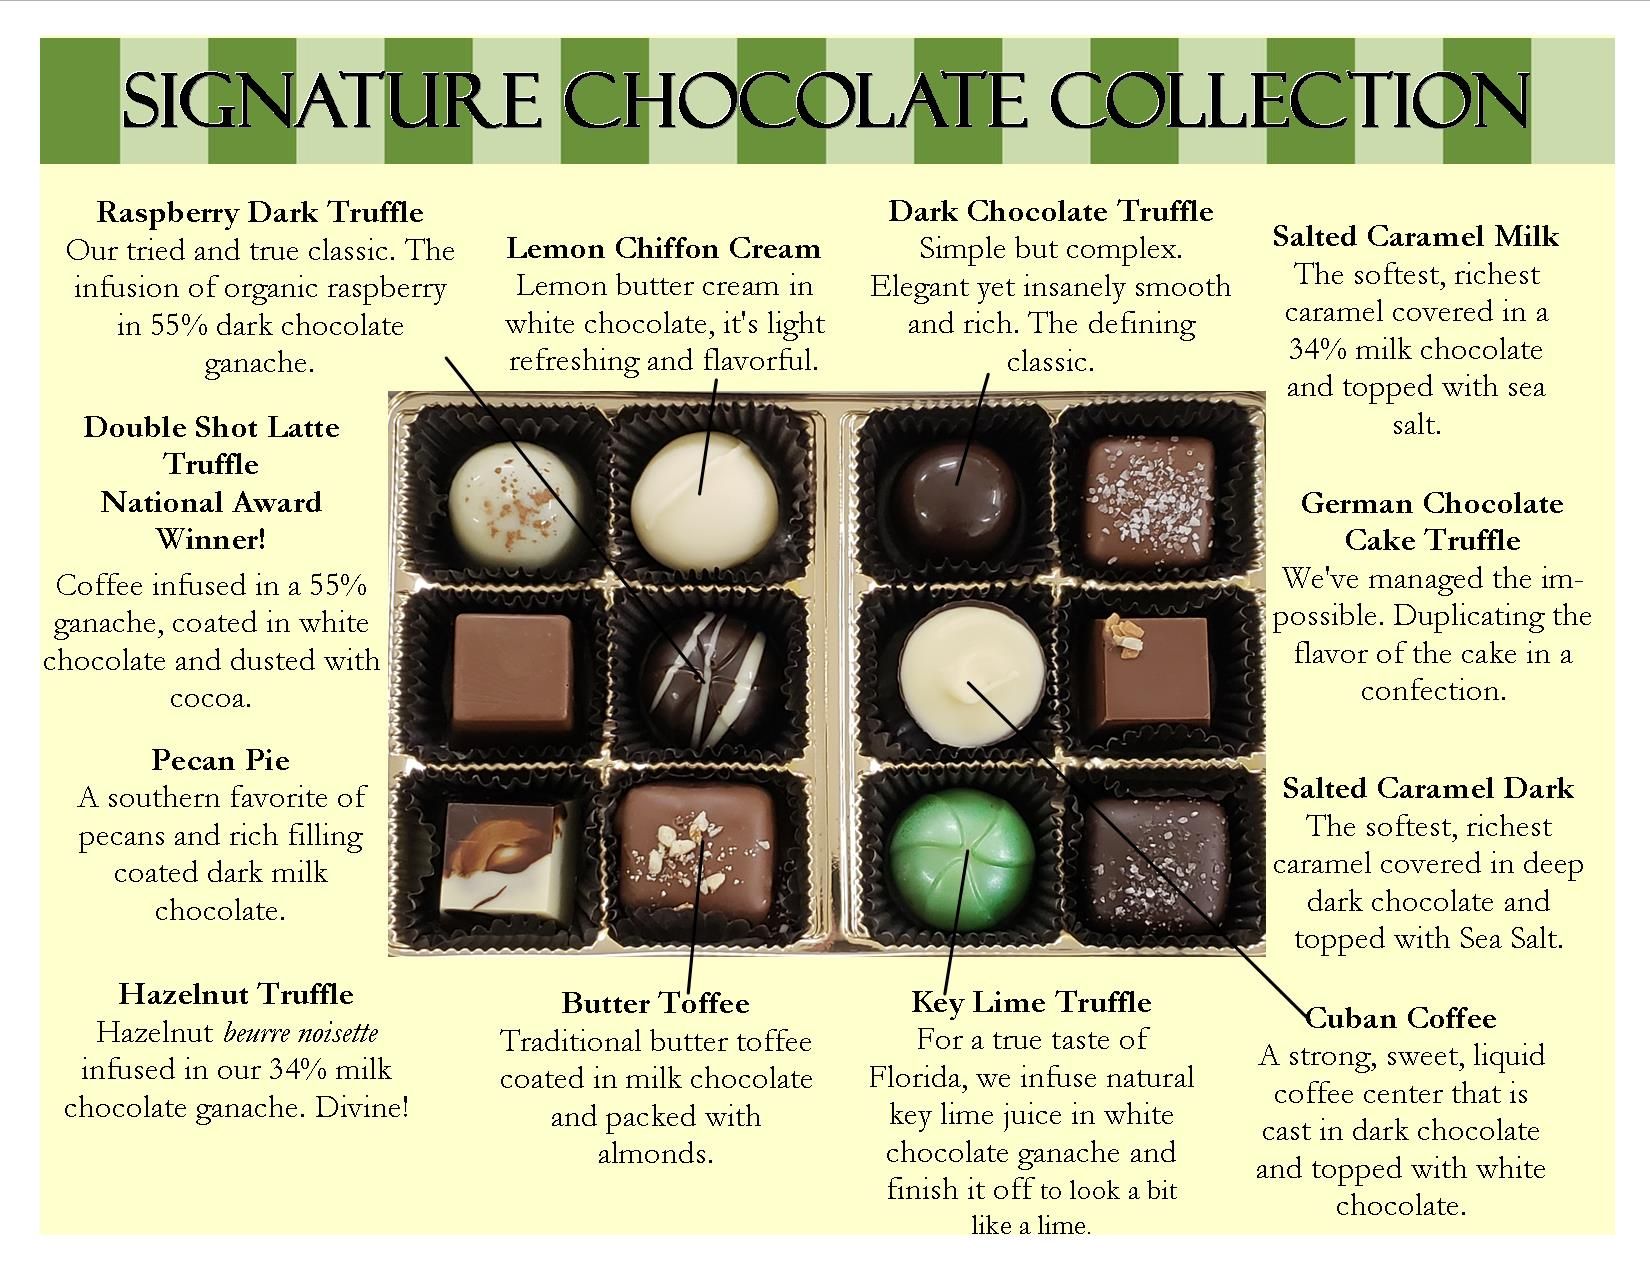 Our Chocolate Collection